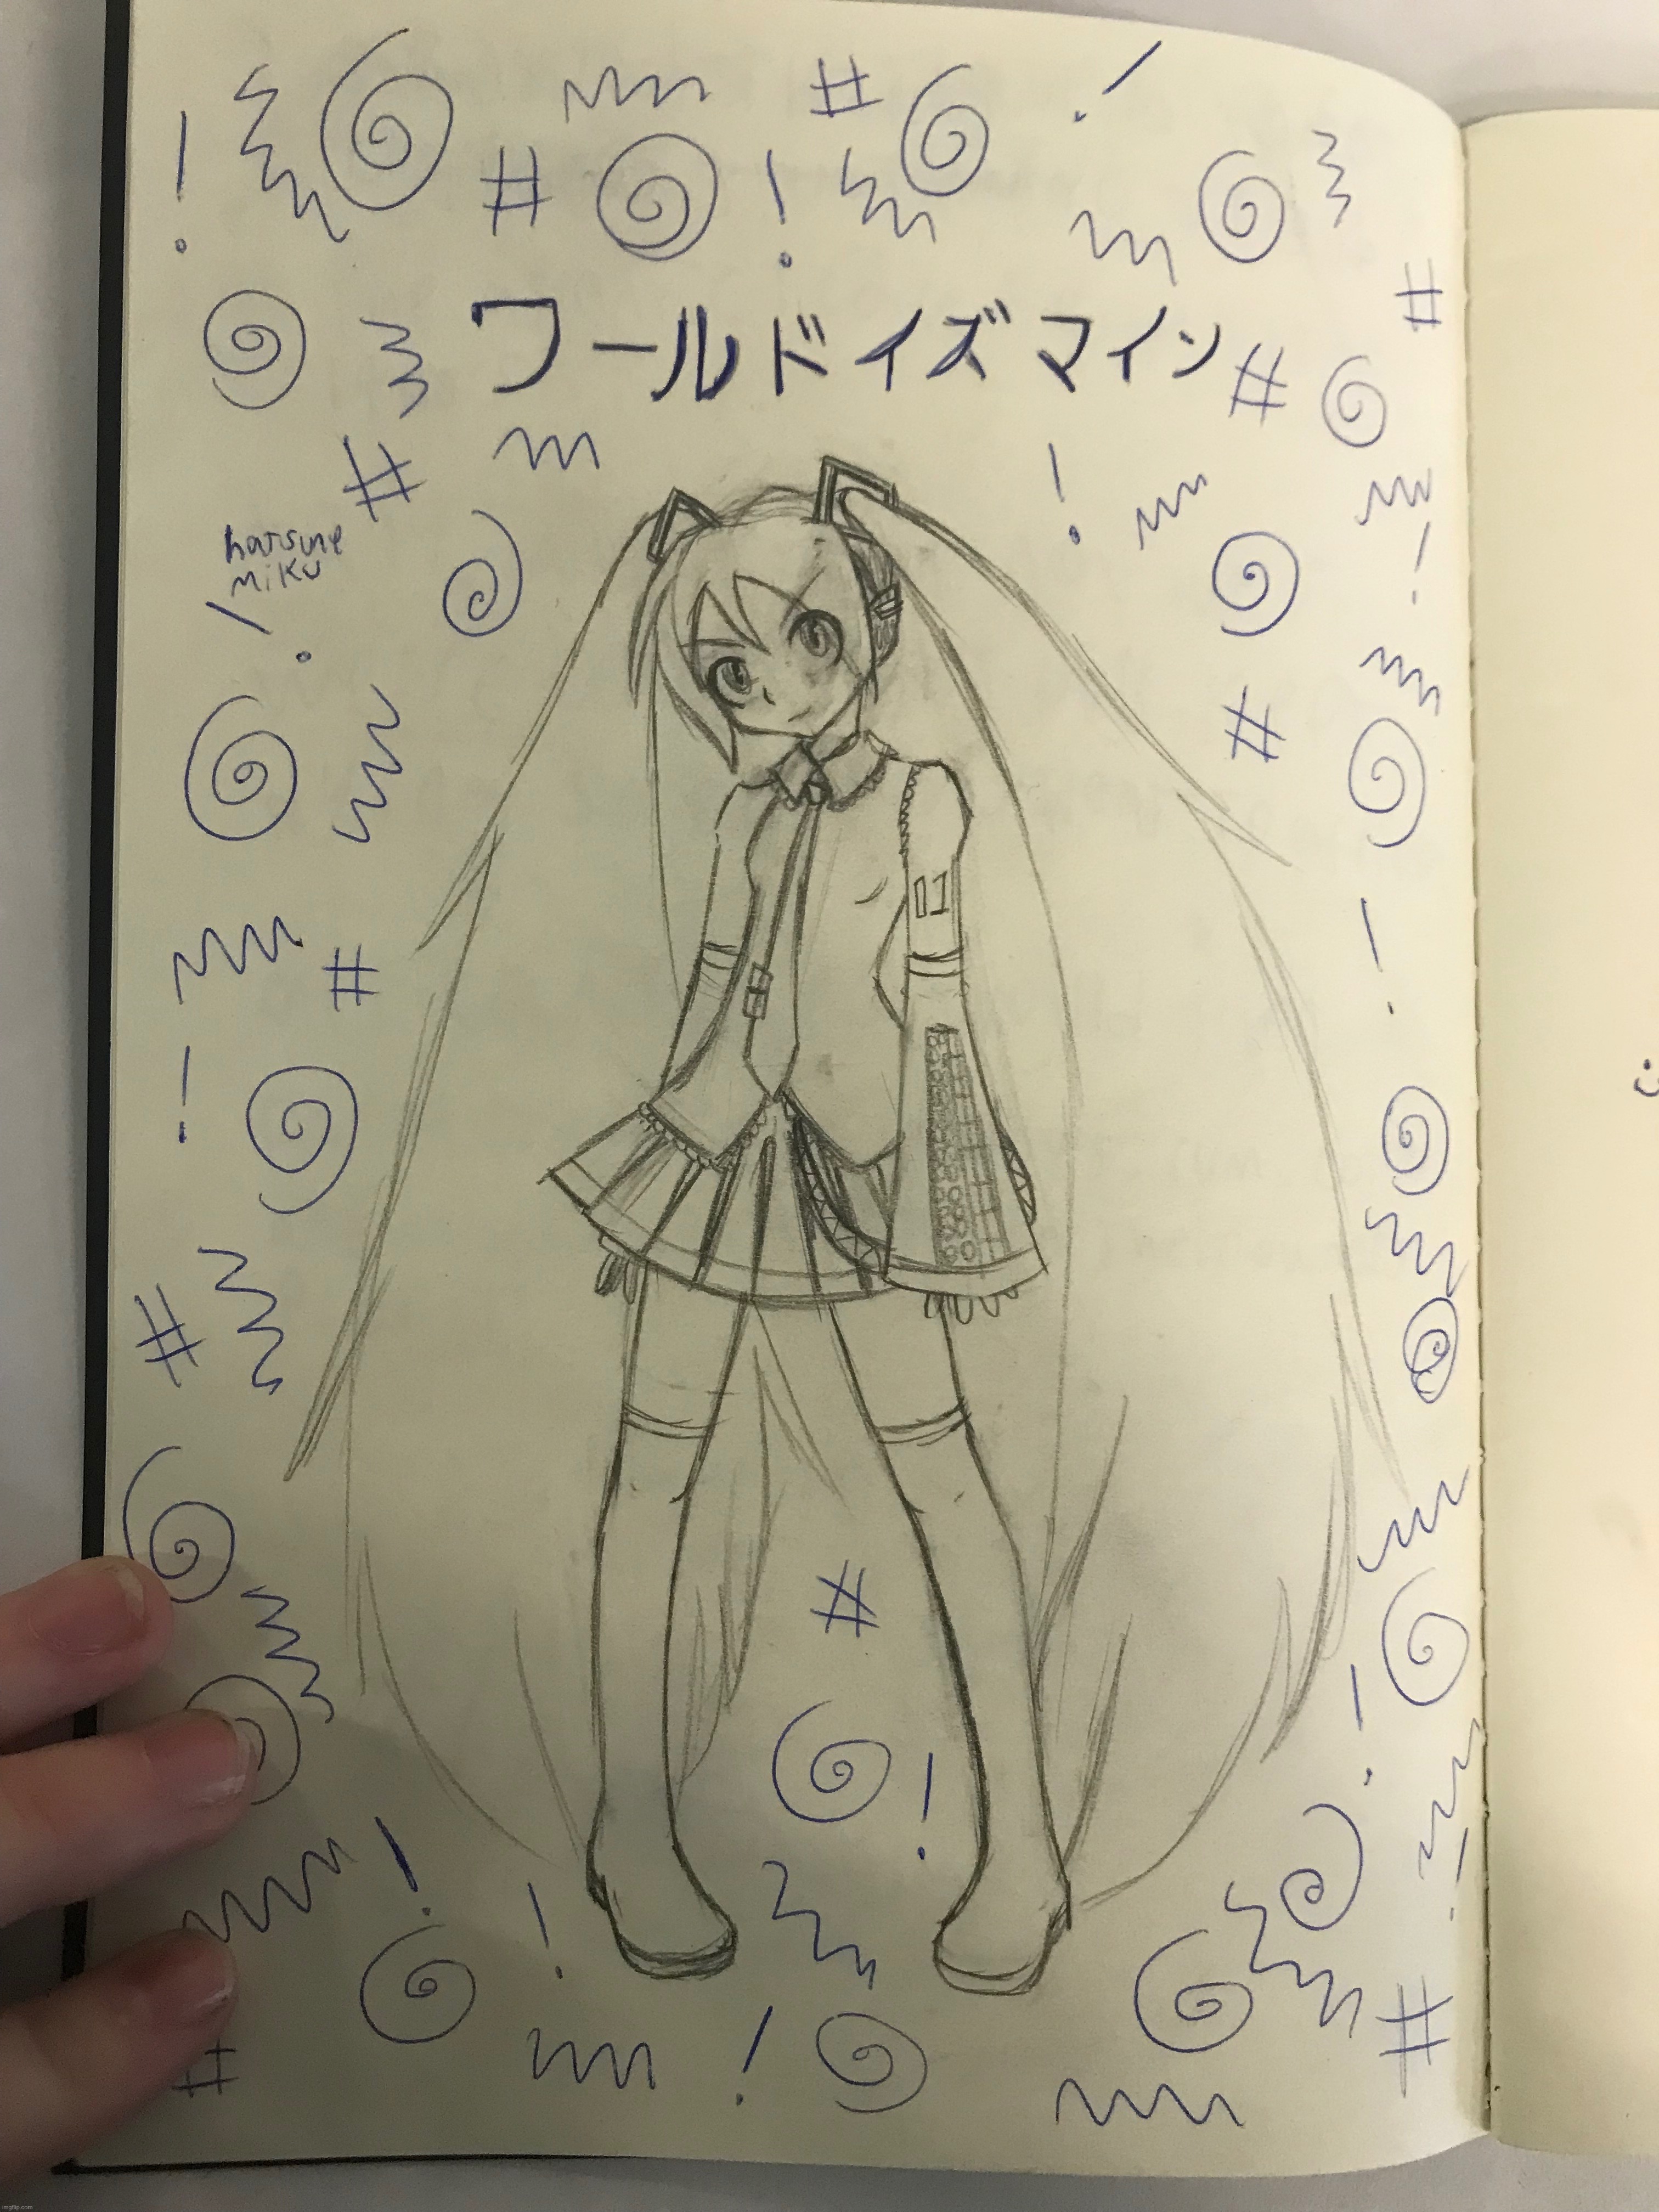 drew hatsune miku in my socials notebook cause i forgot the assignment | image tagged in art,drawing,hatsune miku,world is mine,vocaloid | made w/ Imgflip meme maker